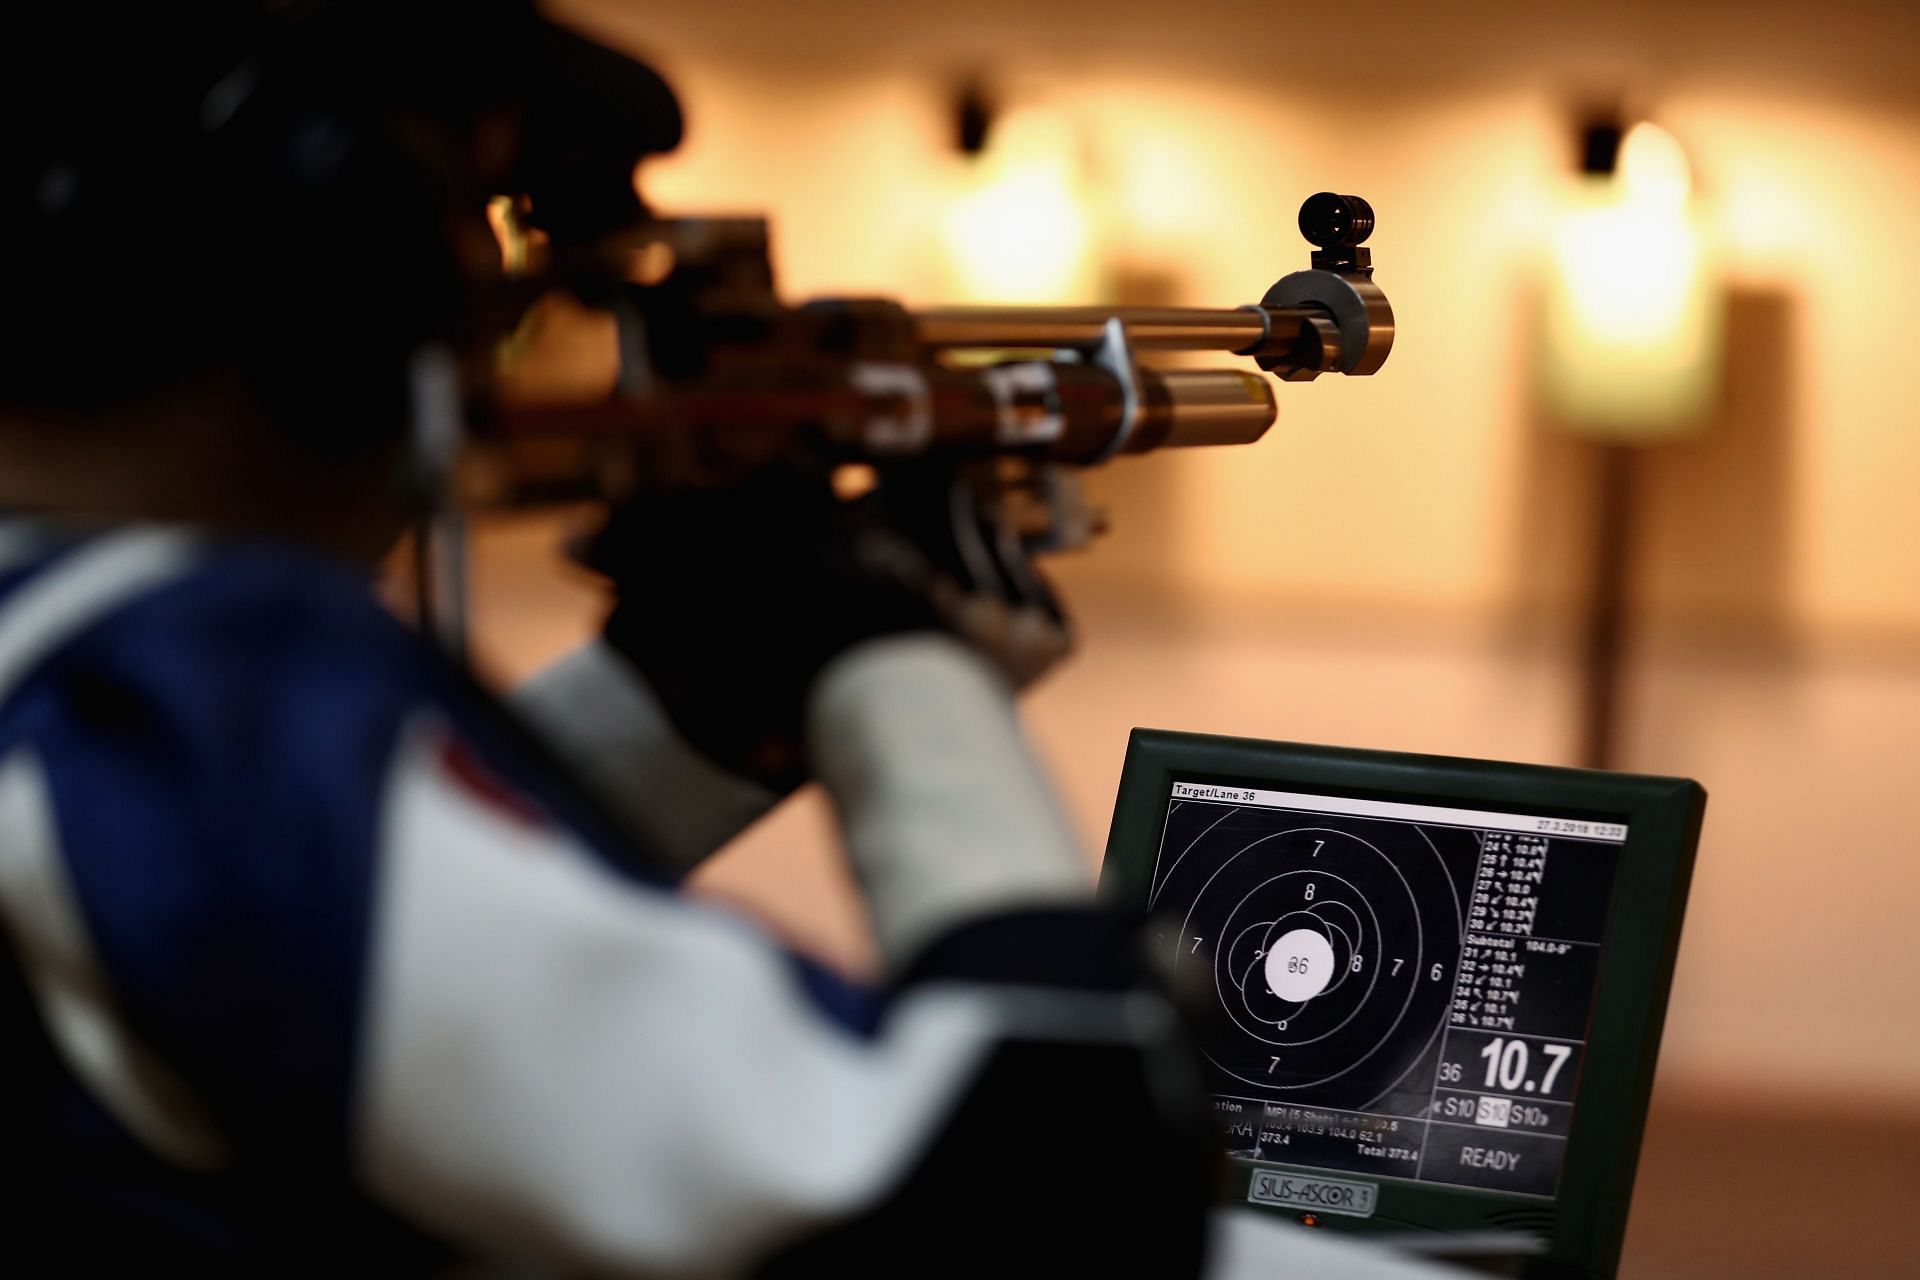 Shooting is not part of the initial list of disciplines for the 2026 CWG. (PC: Getty Images)